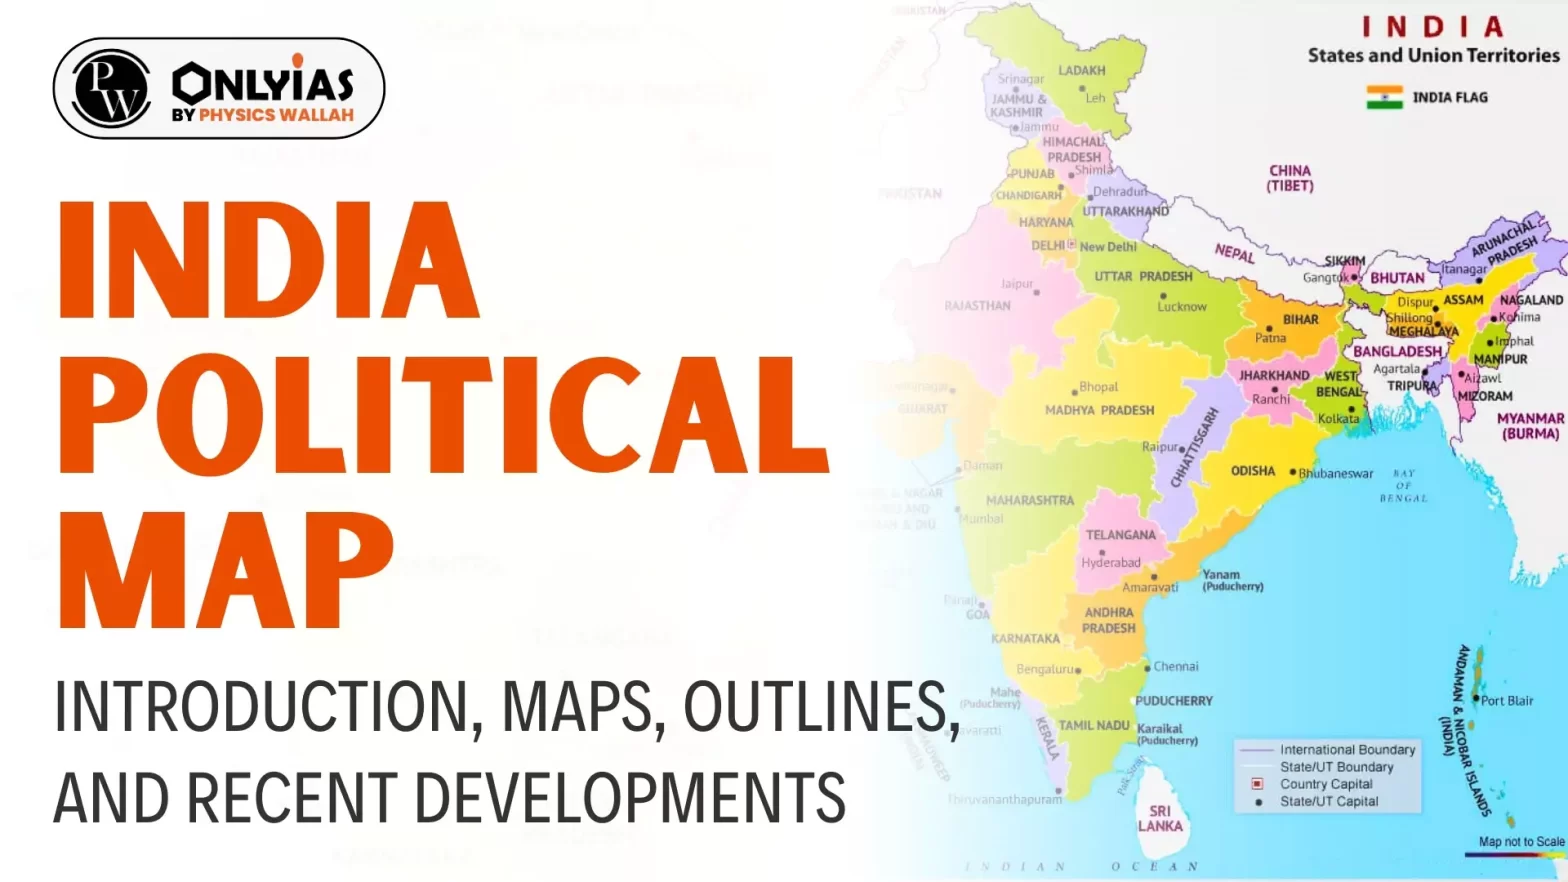 India Political Map: Introduction, Maps, Outlines, and Recent Developments